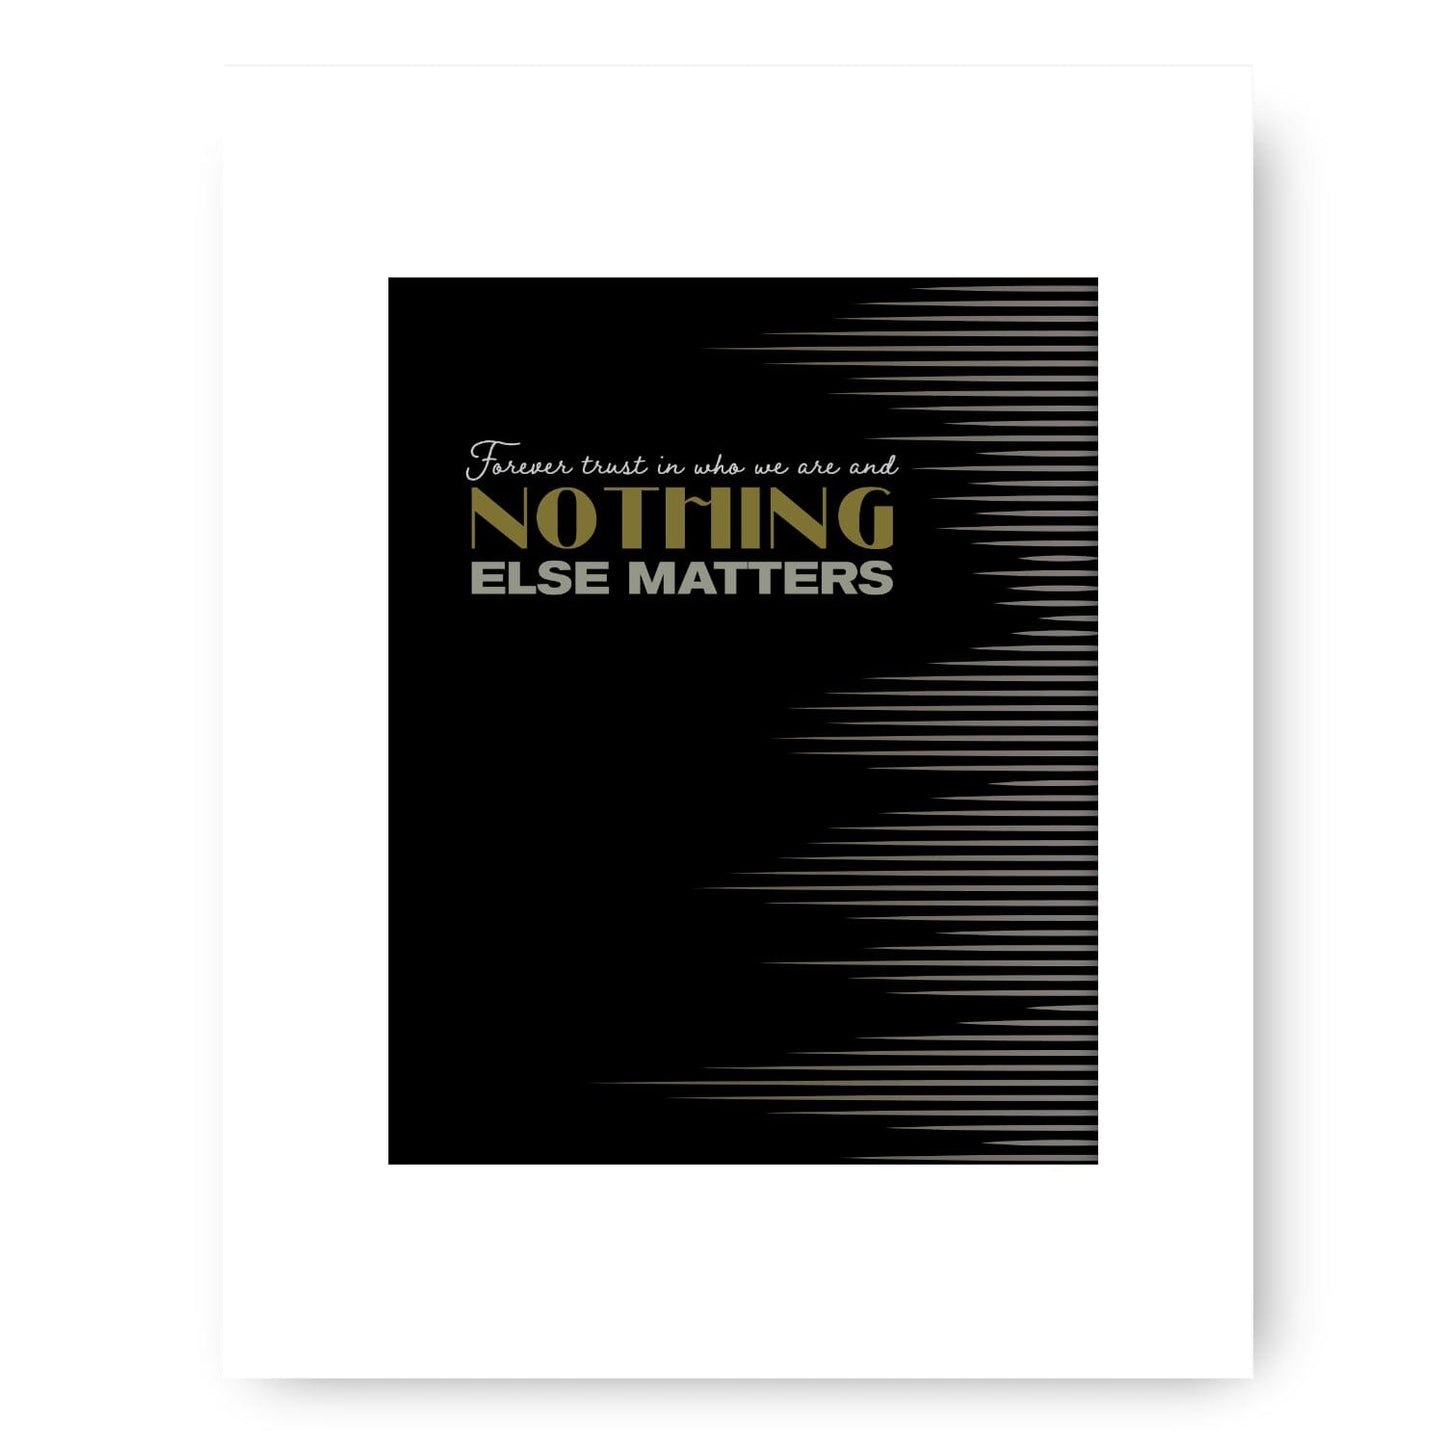 Nothing Else Matters by Metallica - Lyric Inspired Song Print Song Lyrics Art Song Lyrics Art 8x10 Unframed White Matted Print 